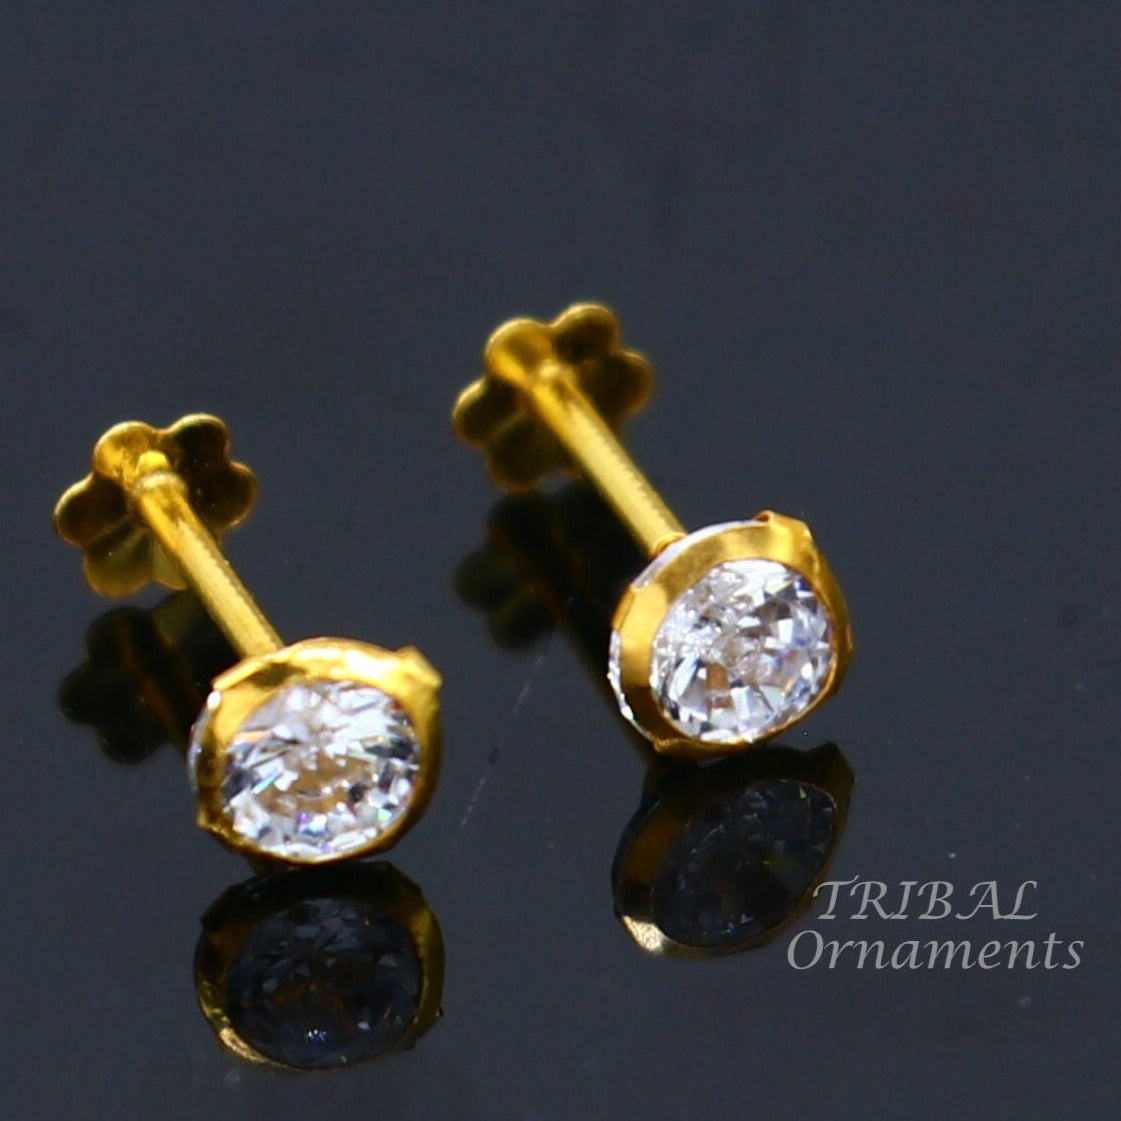 Tanishq Gold Marquise Stud Earrings Price Starting From Rs 5,000/Unit. Find  Verified Sellers in Sangli - JdMart